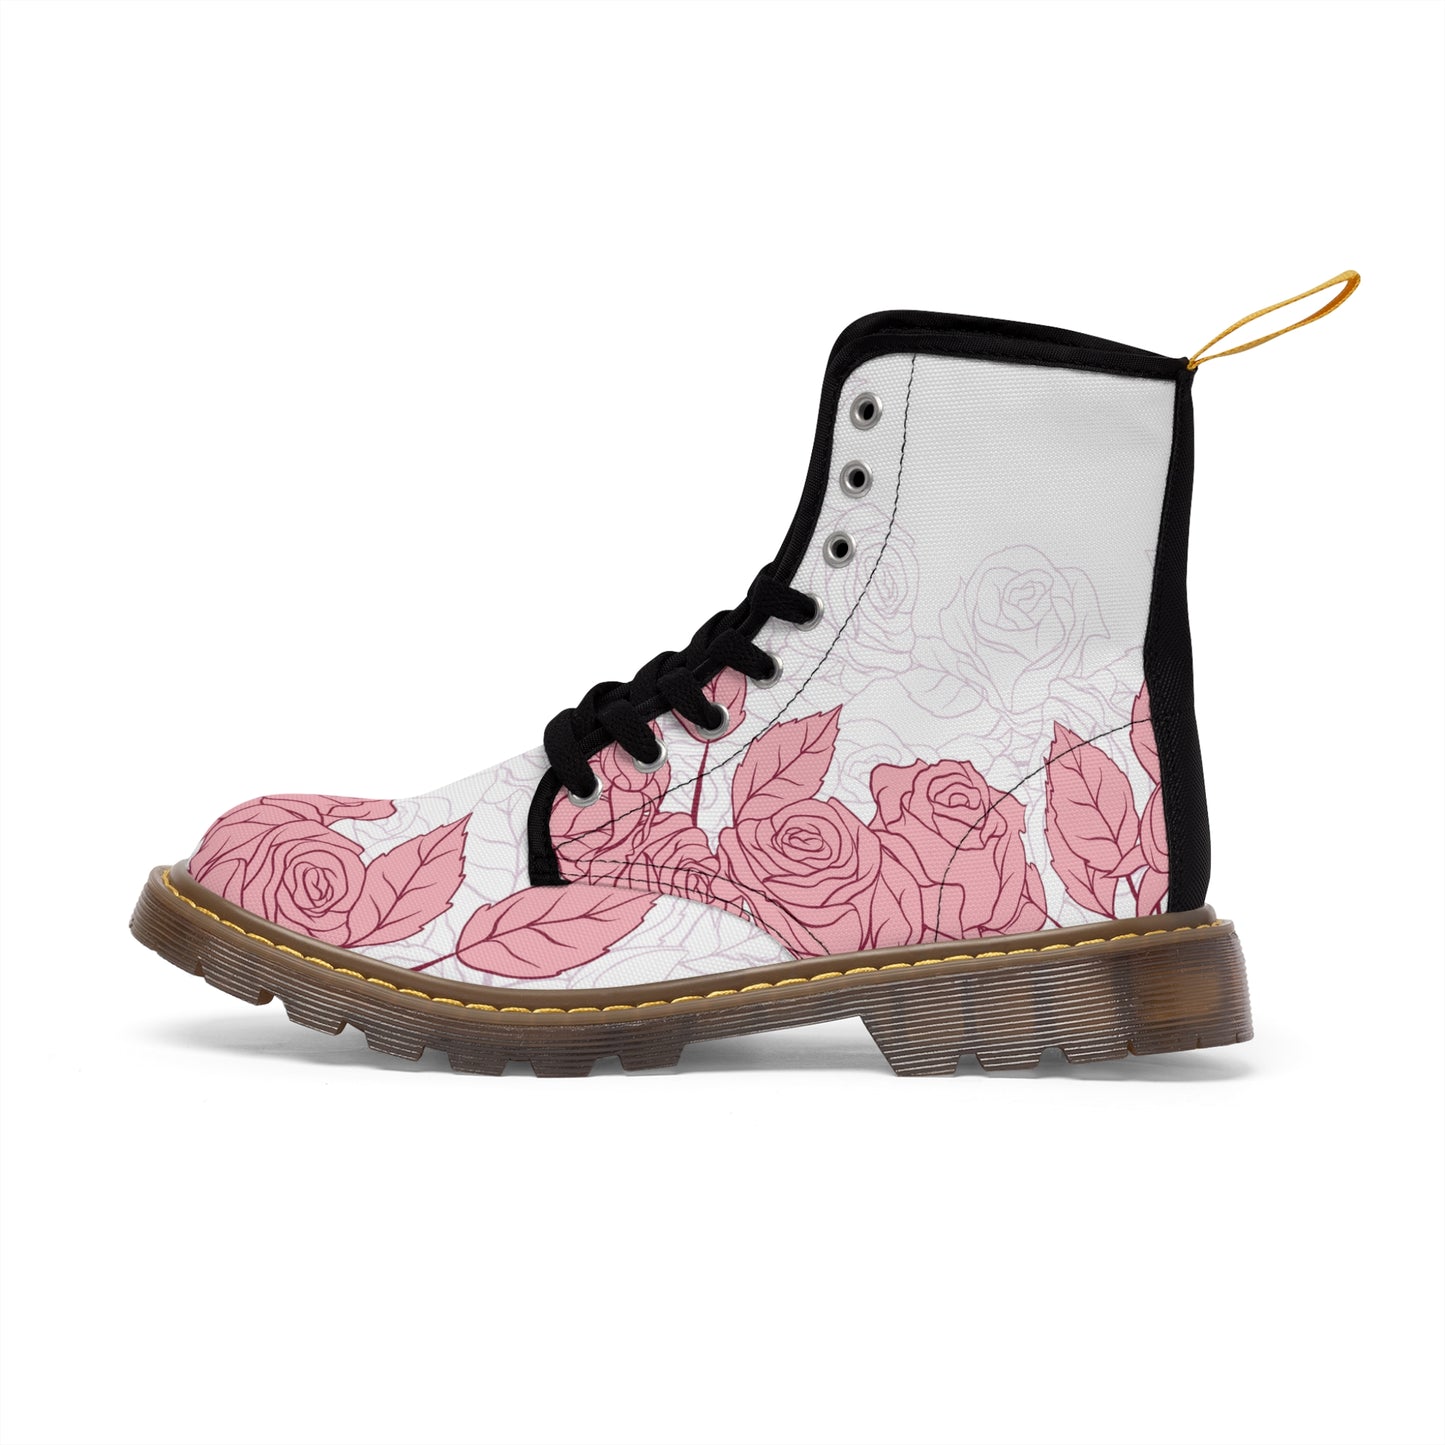 WOMEN'S CANVAS HIGH TOP BOOTS, PINK ROSES THEME CK